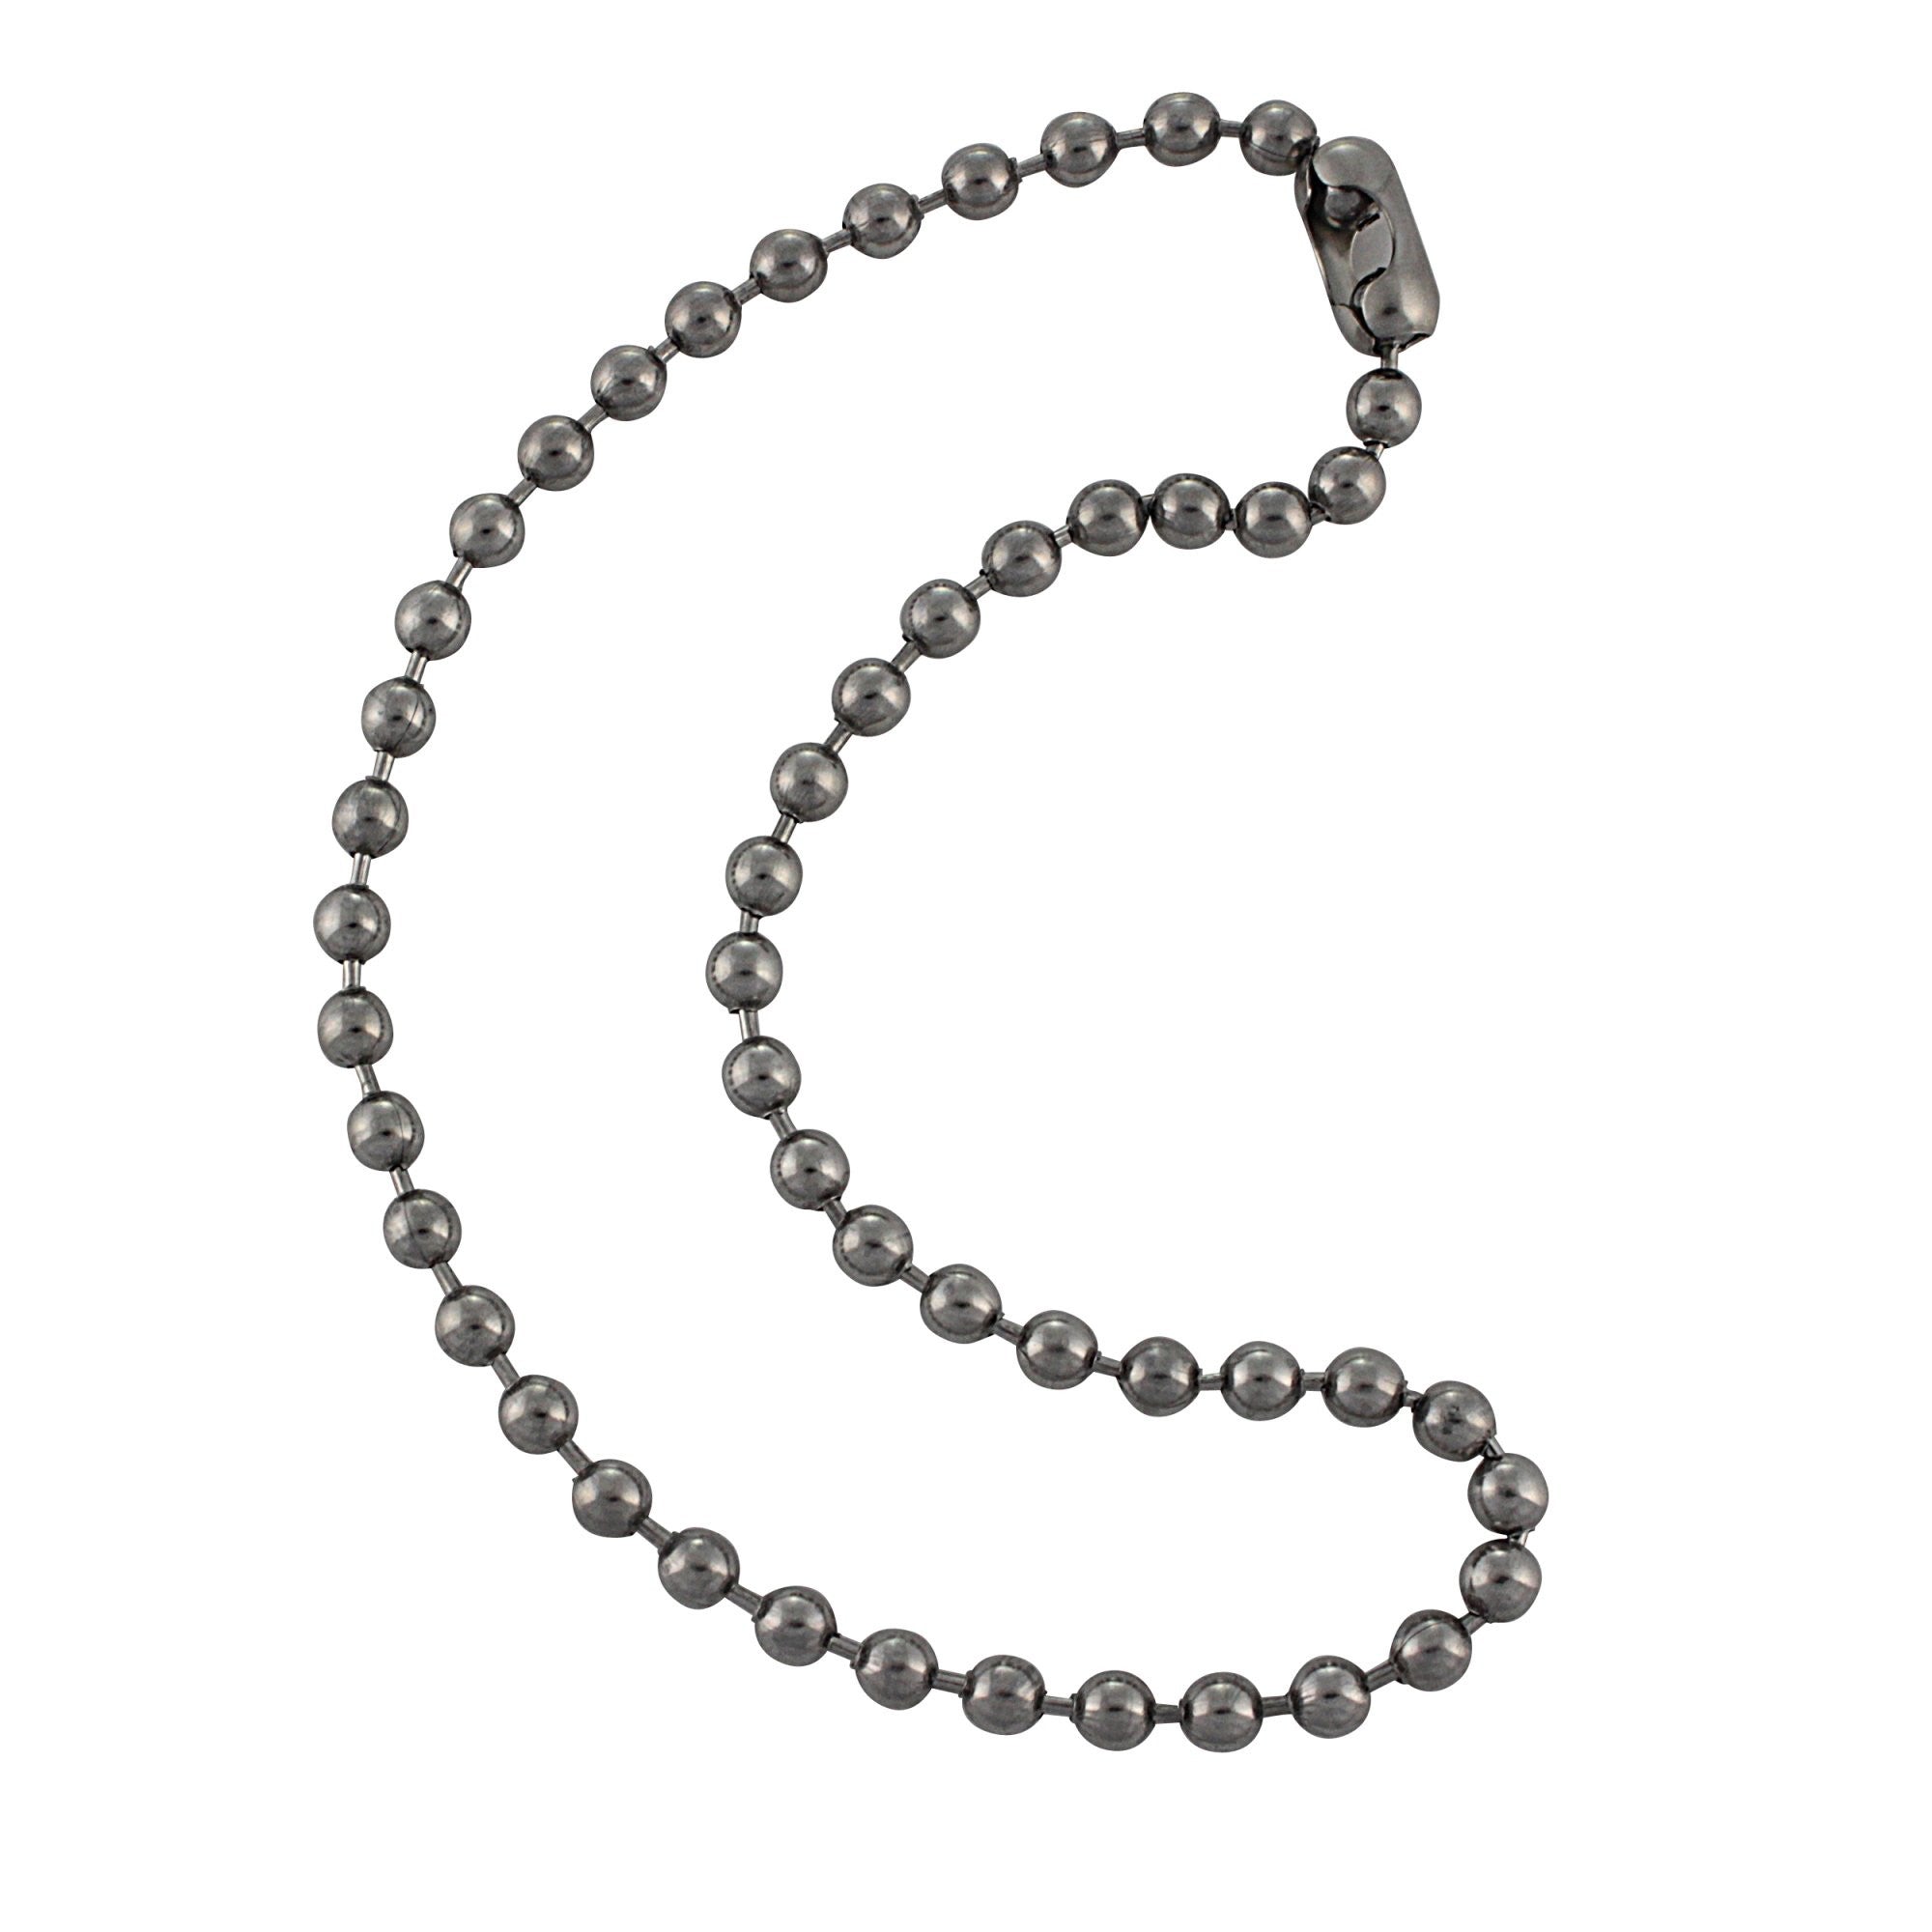 24 inch 2.4mm Stainless Steel Ball Chain Necklace